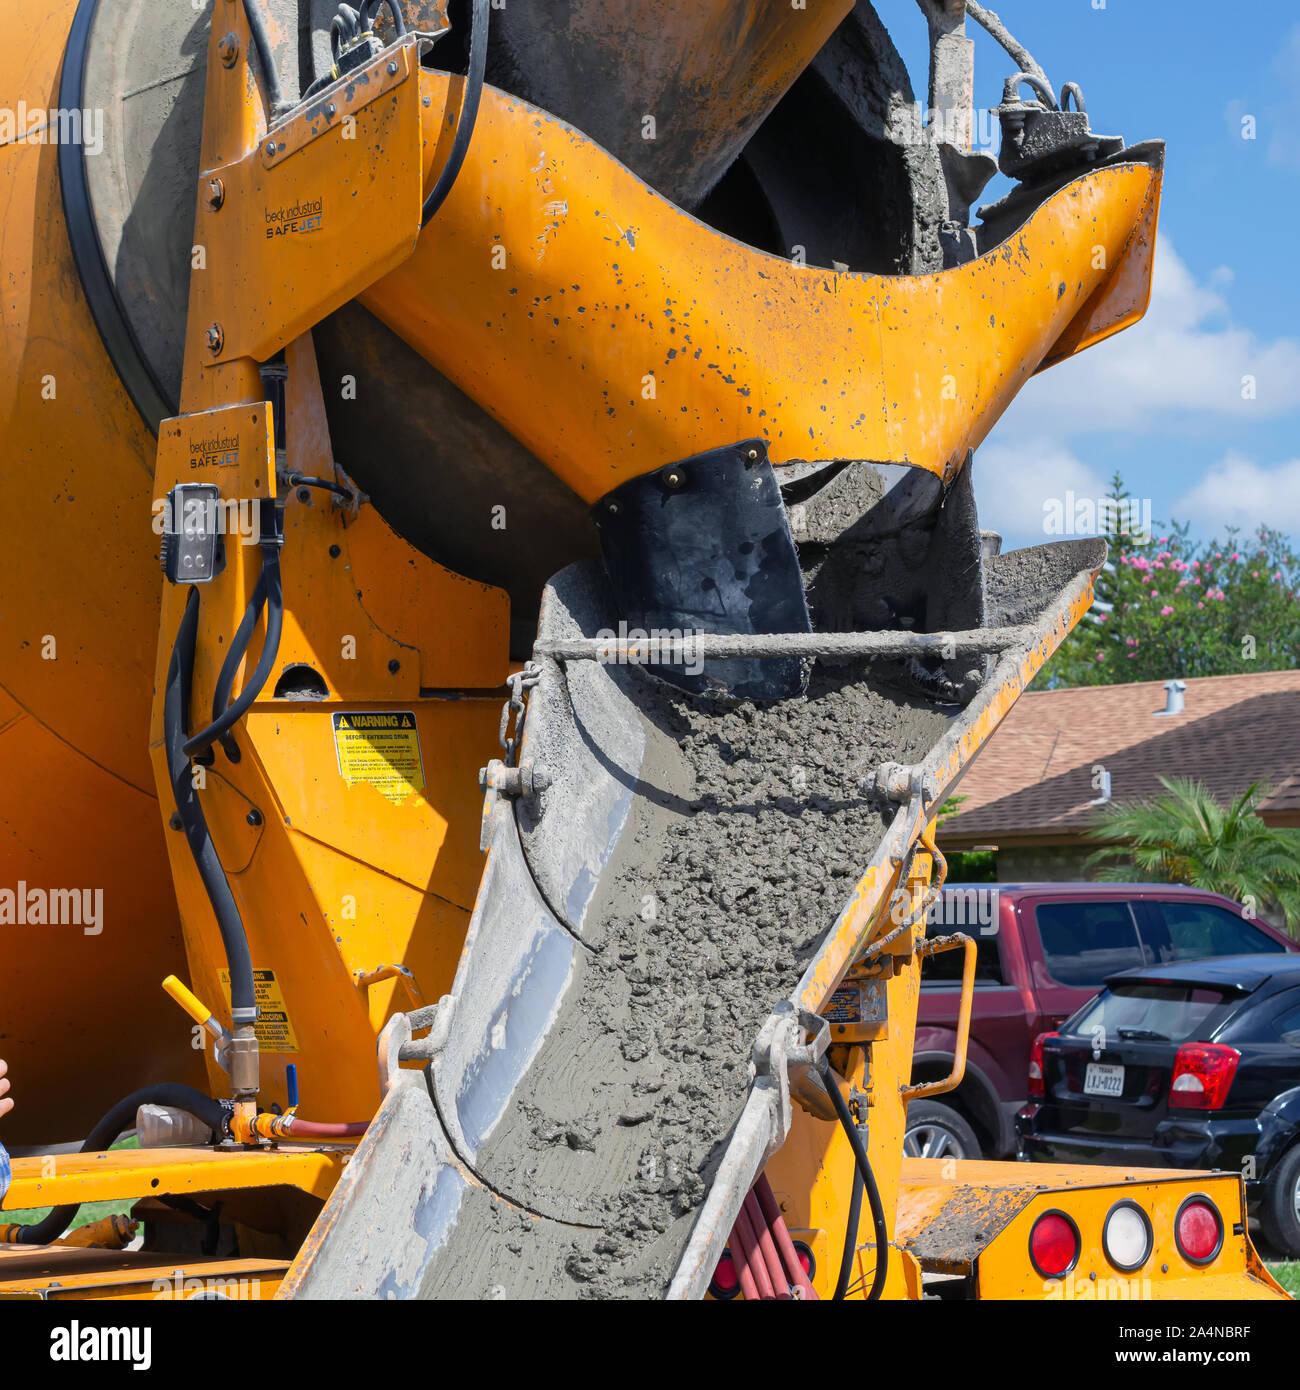 Wet concrete in the chute of a concrete mixing truck. Stock Photo